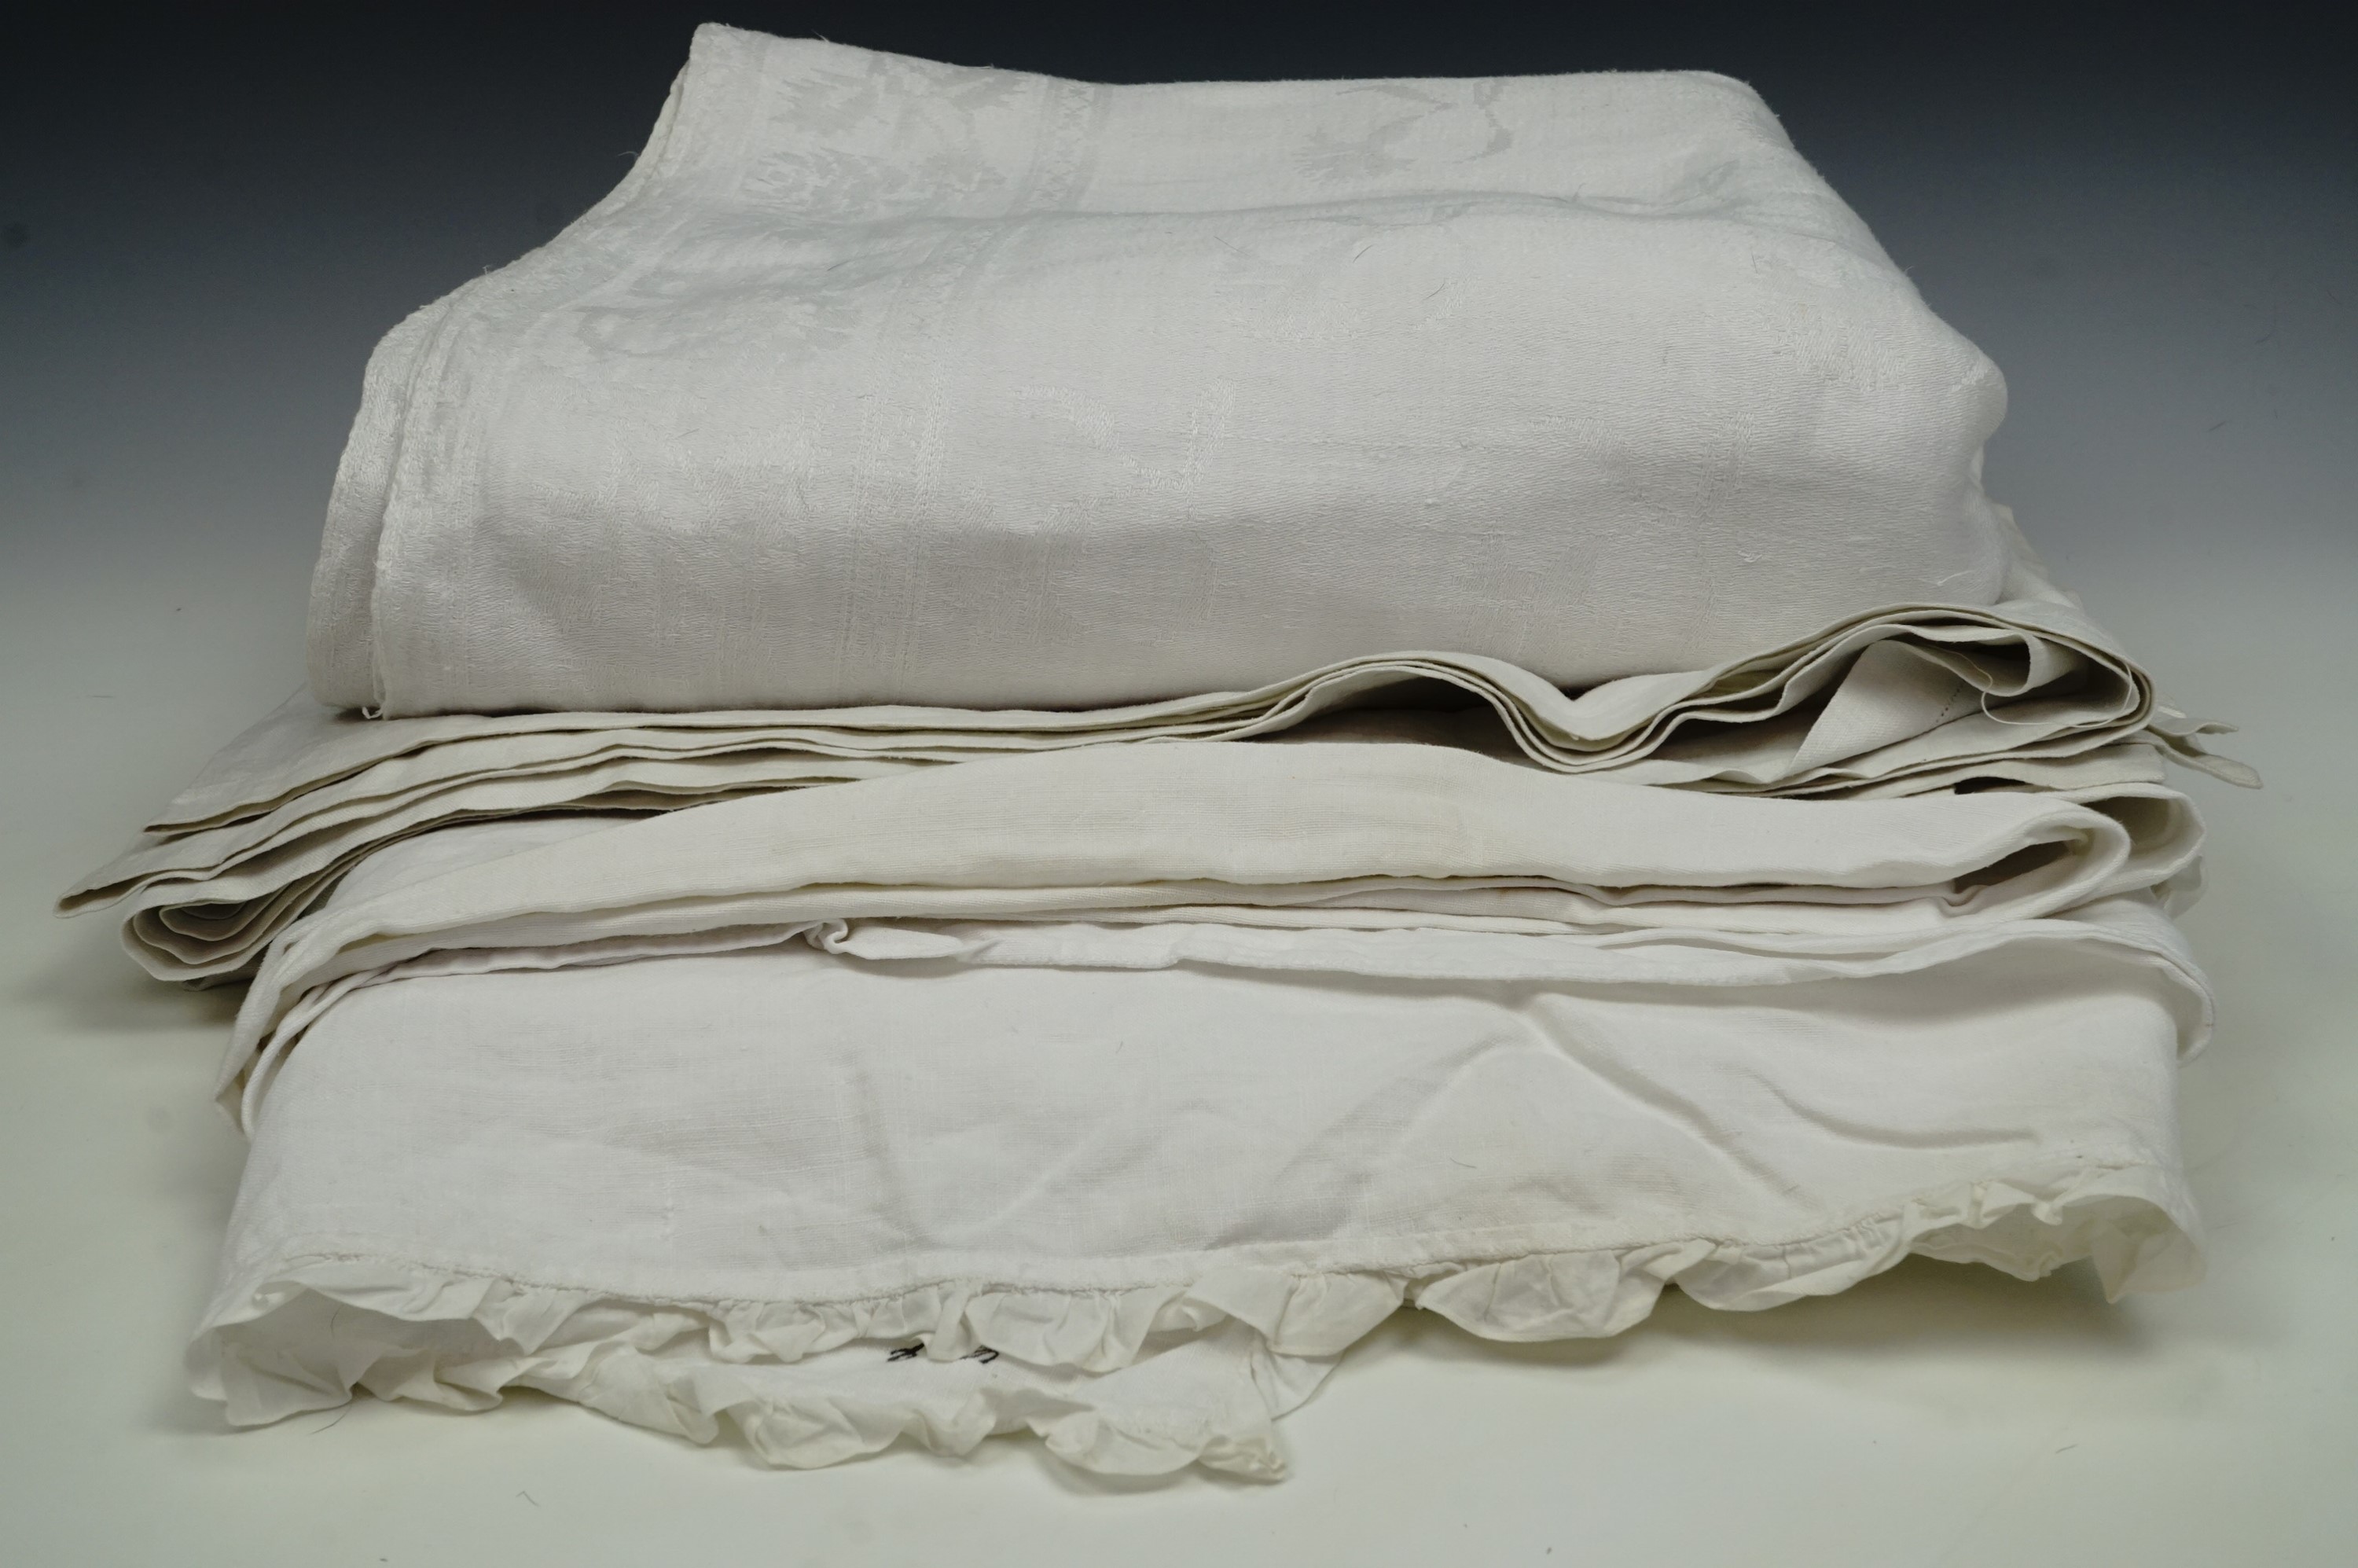 Two tablecloths and a bed sheet